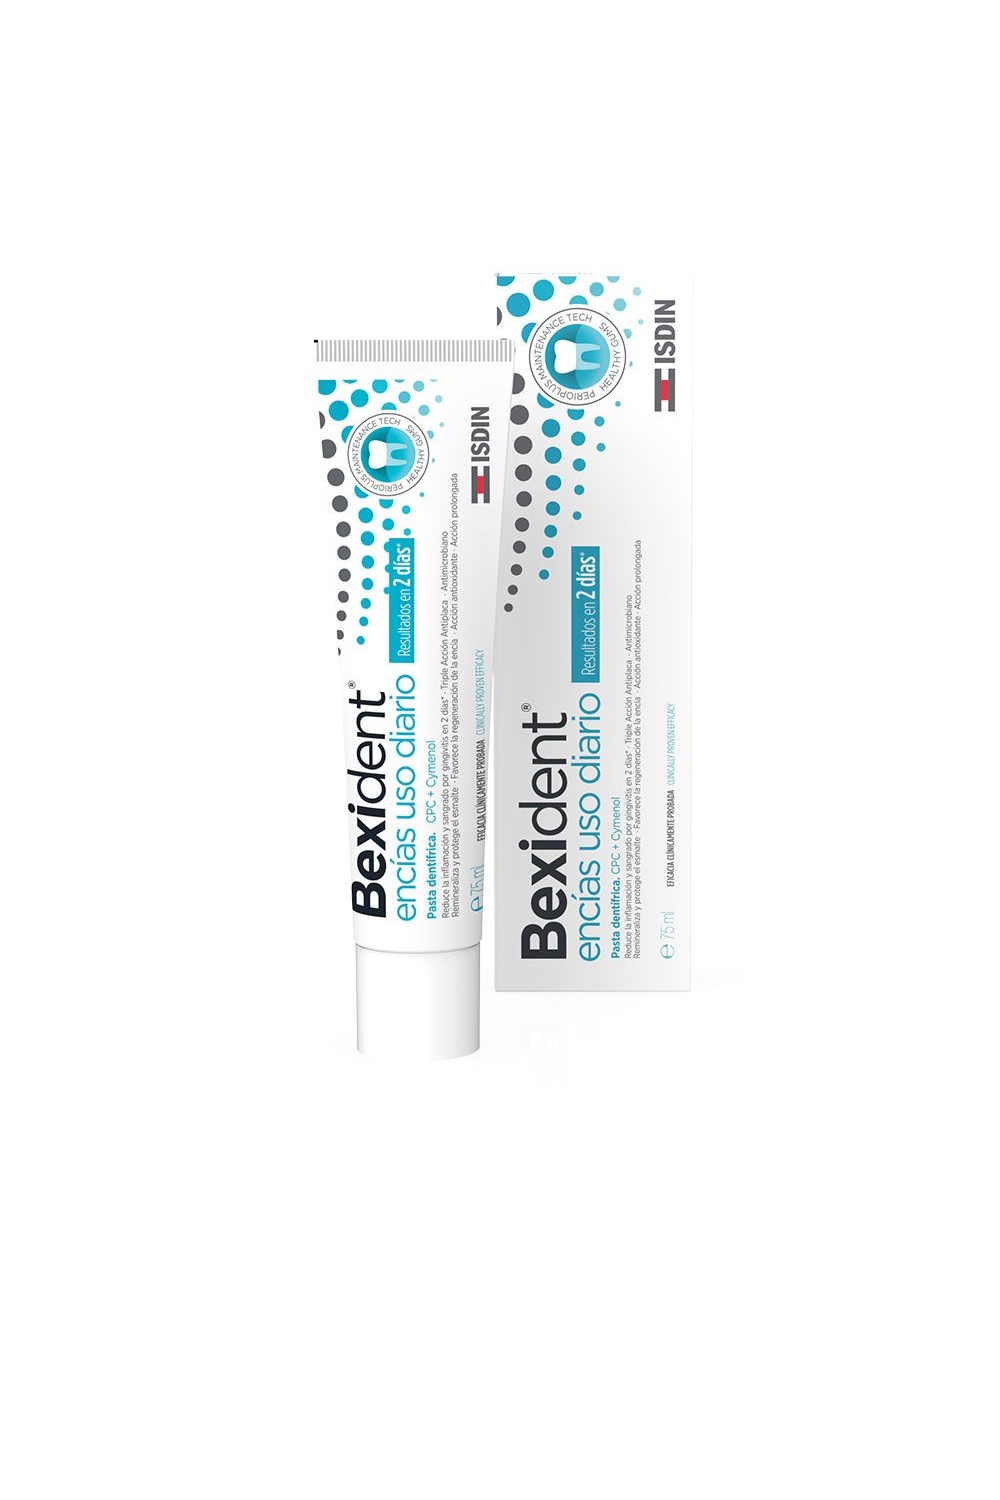 ISDIN - Bexident Gums Toothpaste Triclosan 75ml